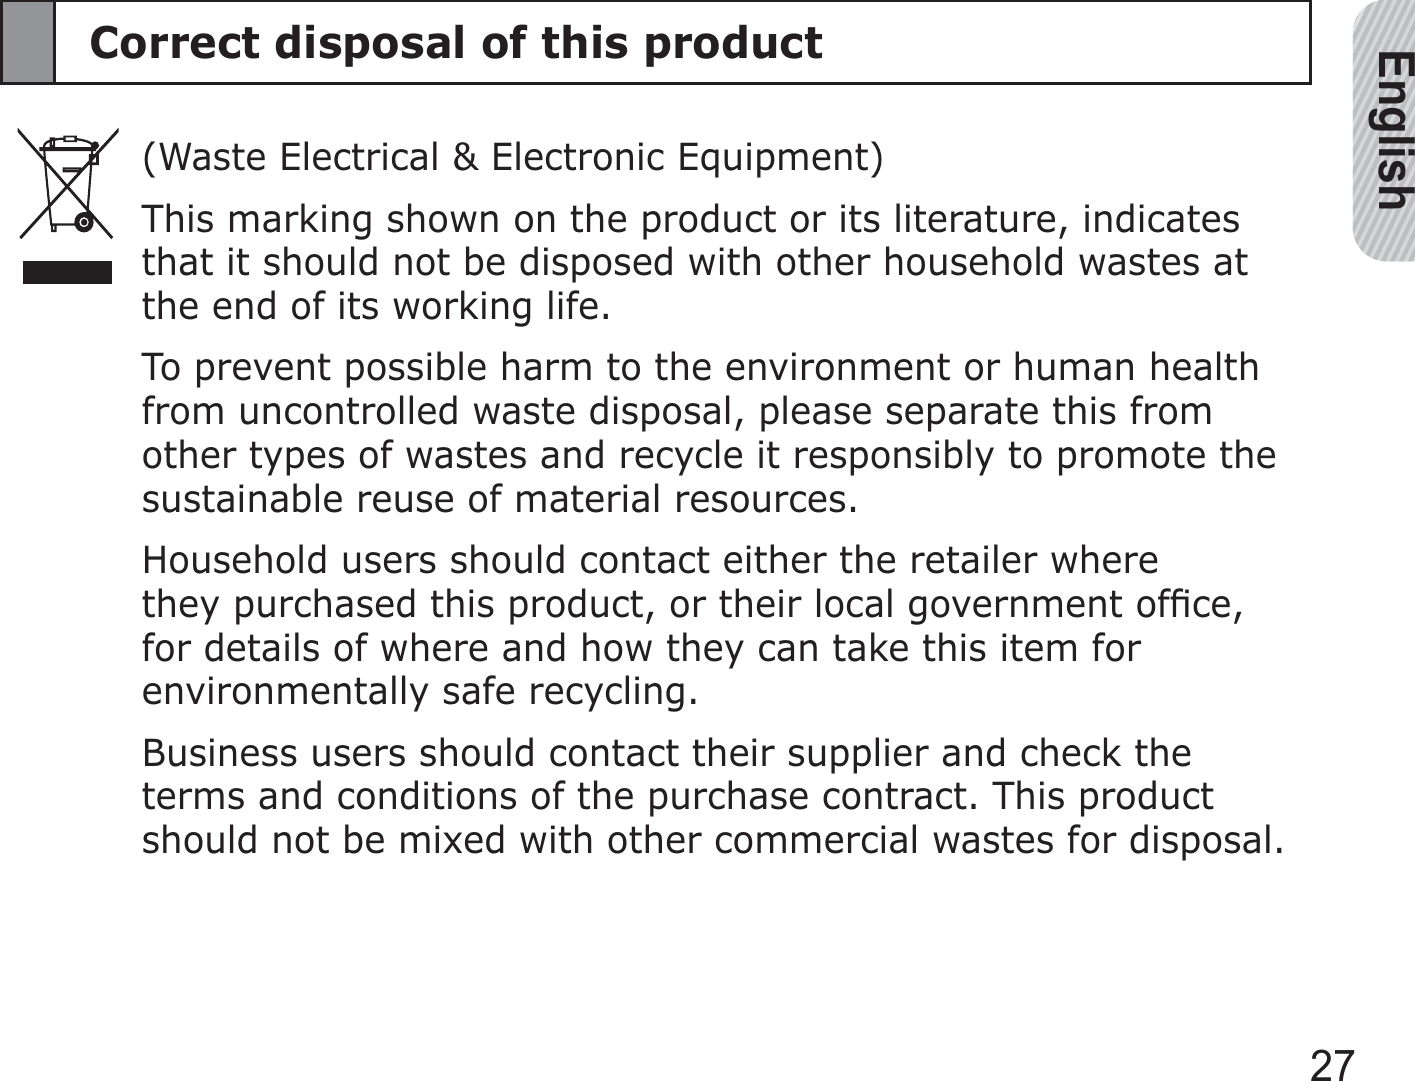 English27Correct disposal of this product(Waste Electrical &amp; Electronic Equipment)This marking shown on the product or its literature, indicates that it should not be disposed with other household wastes at the end of its working life.To prevent possible harm to the environment or human health from uncontrolled waste disposal, please separate this from other types of wastes and recycle it responsibly to promote the sustainable reuse of material resources.Household users should contact either the retailer where they purchased this product, or their local government ofﬁce, for details of where and how they can take this item for environmentally safe recycling.Business users should contact their supplier and check the terms and conditions of the purchase contract. This product should not be mixed with other commercial wastes for disposal.